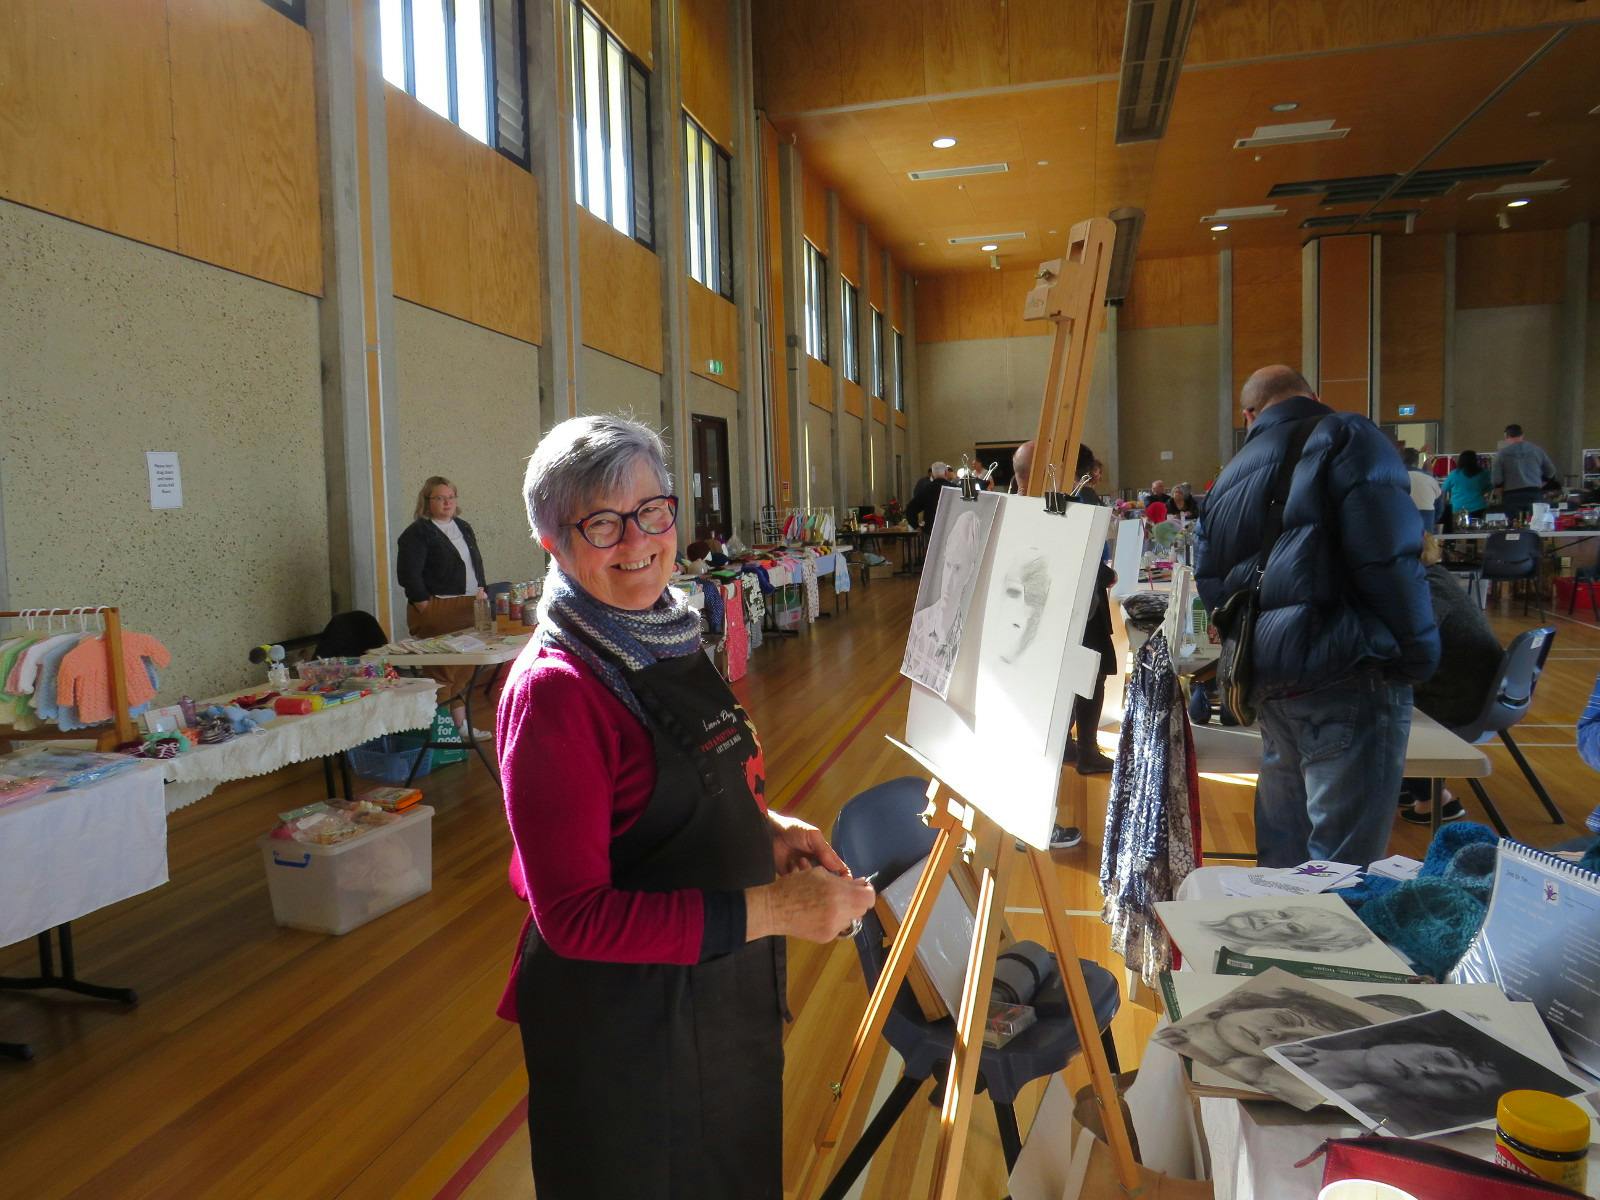 A lady in a dark pink jumper and black apron stands before a painting easel